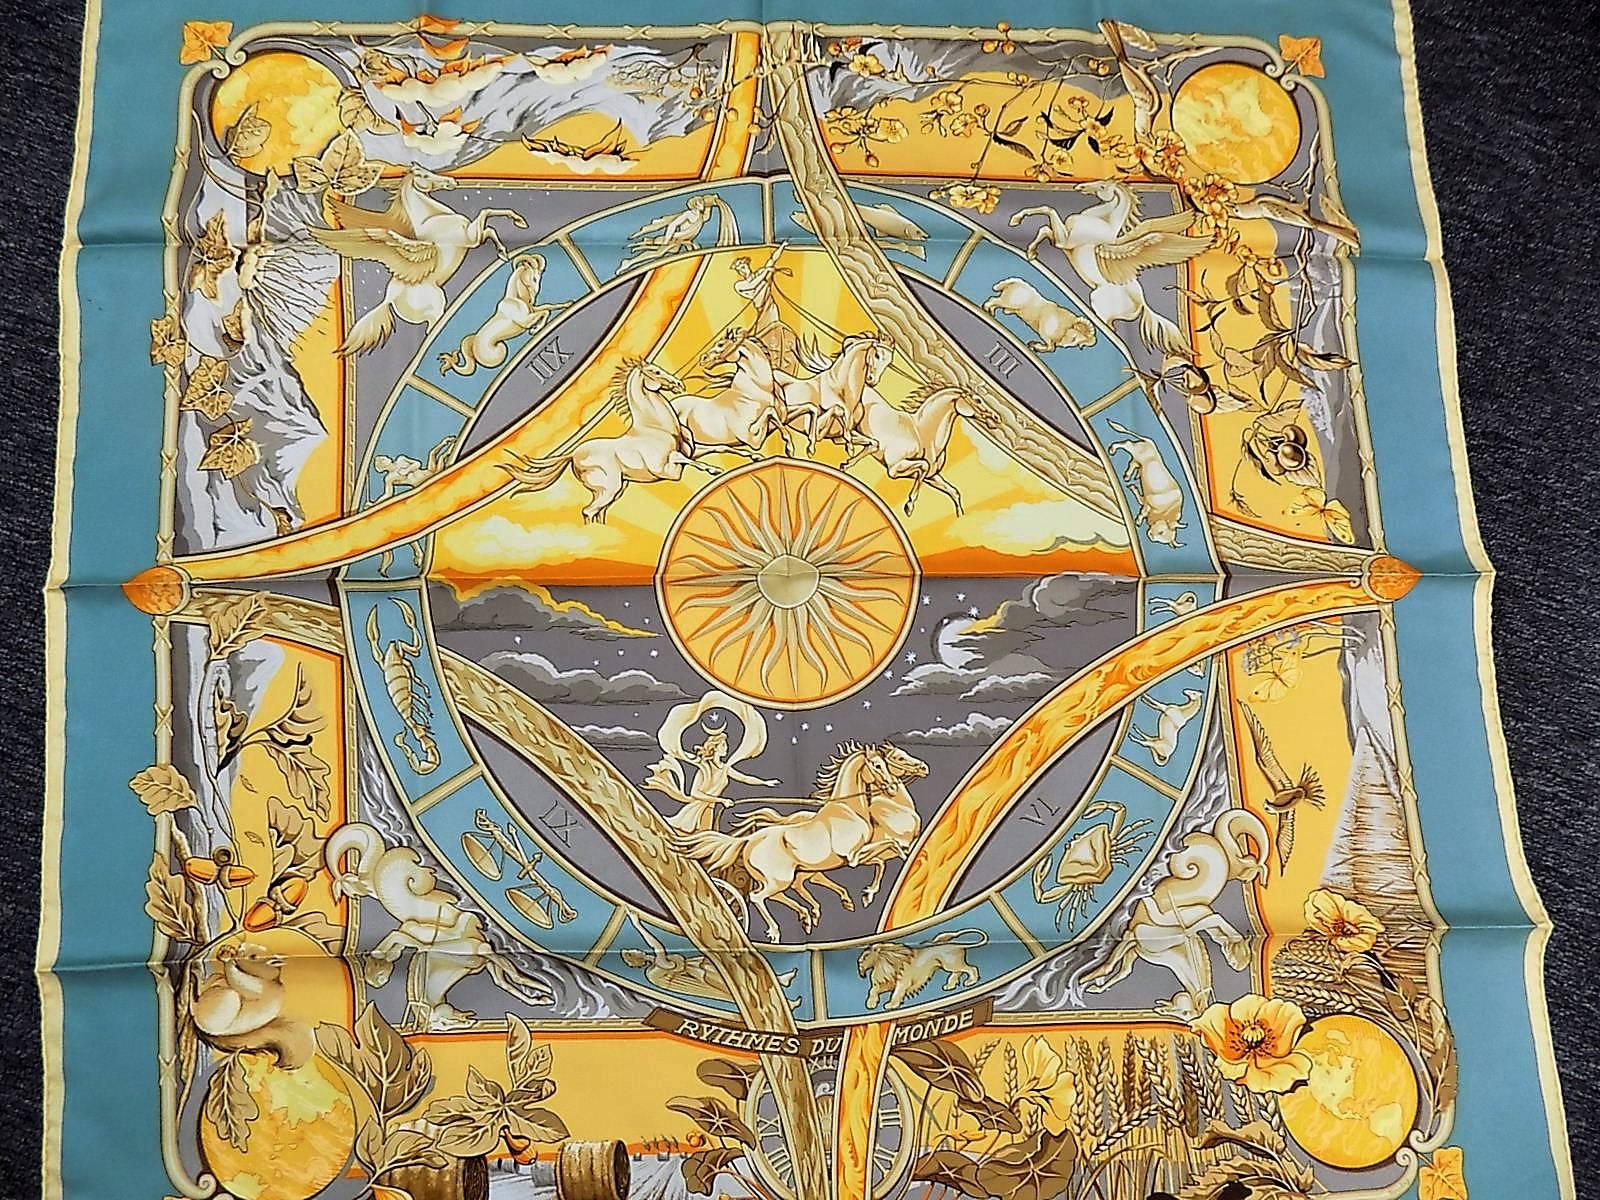 HERMES  Scarf Rythmes du Monde by Laurence Bourthoumieux.  2